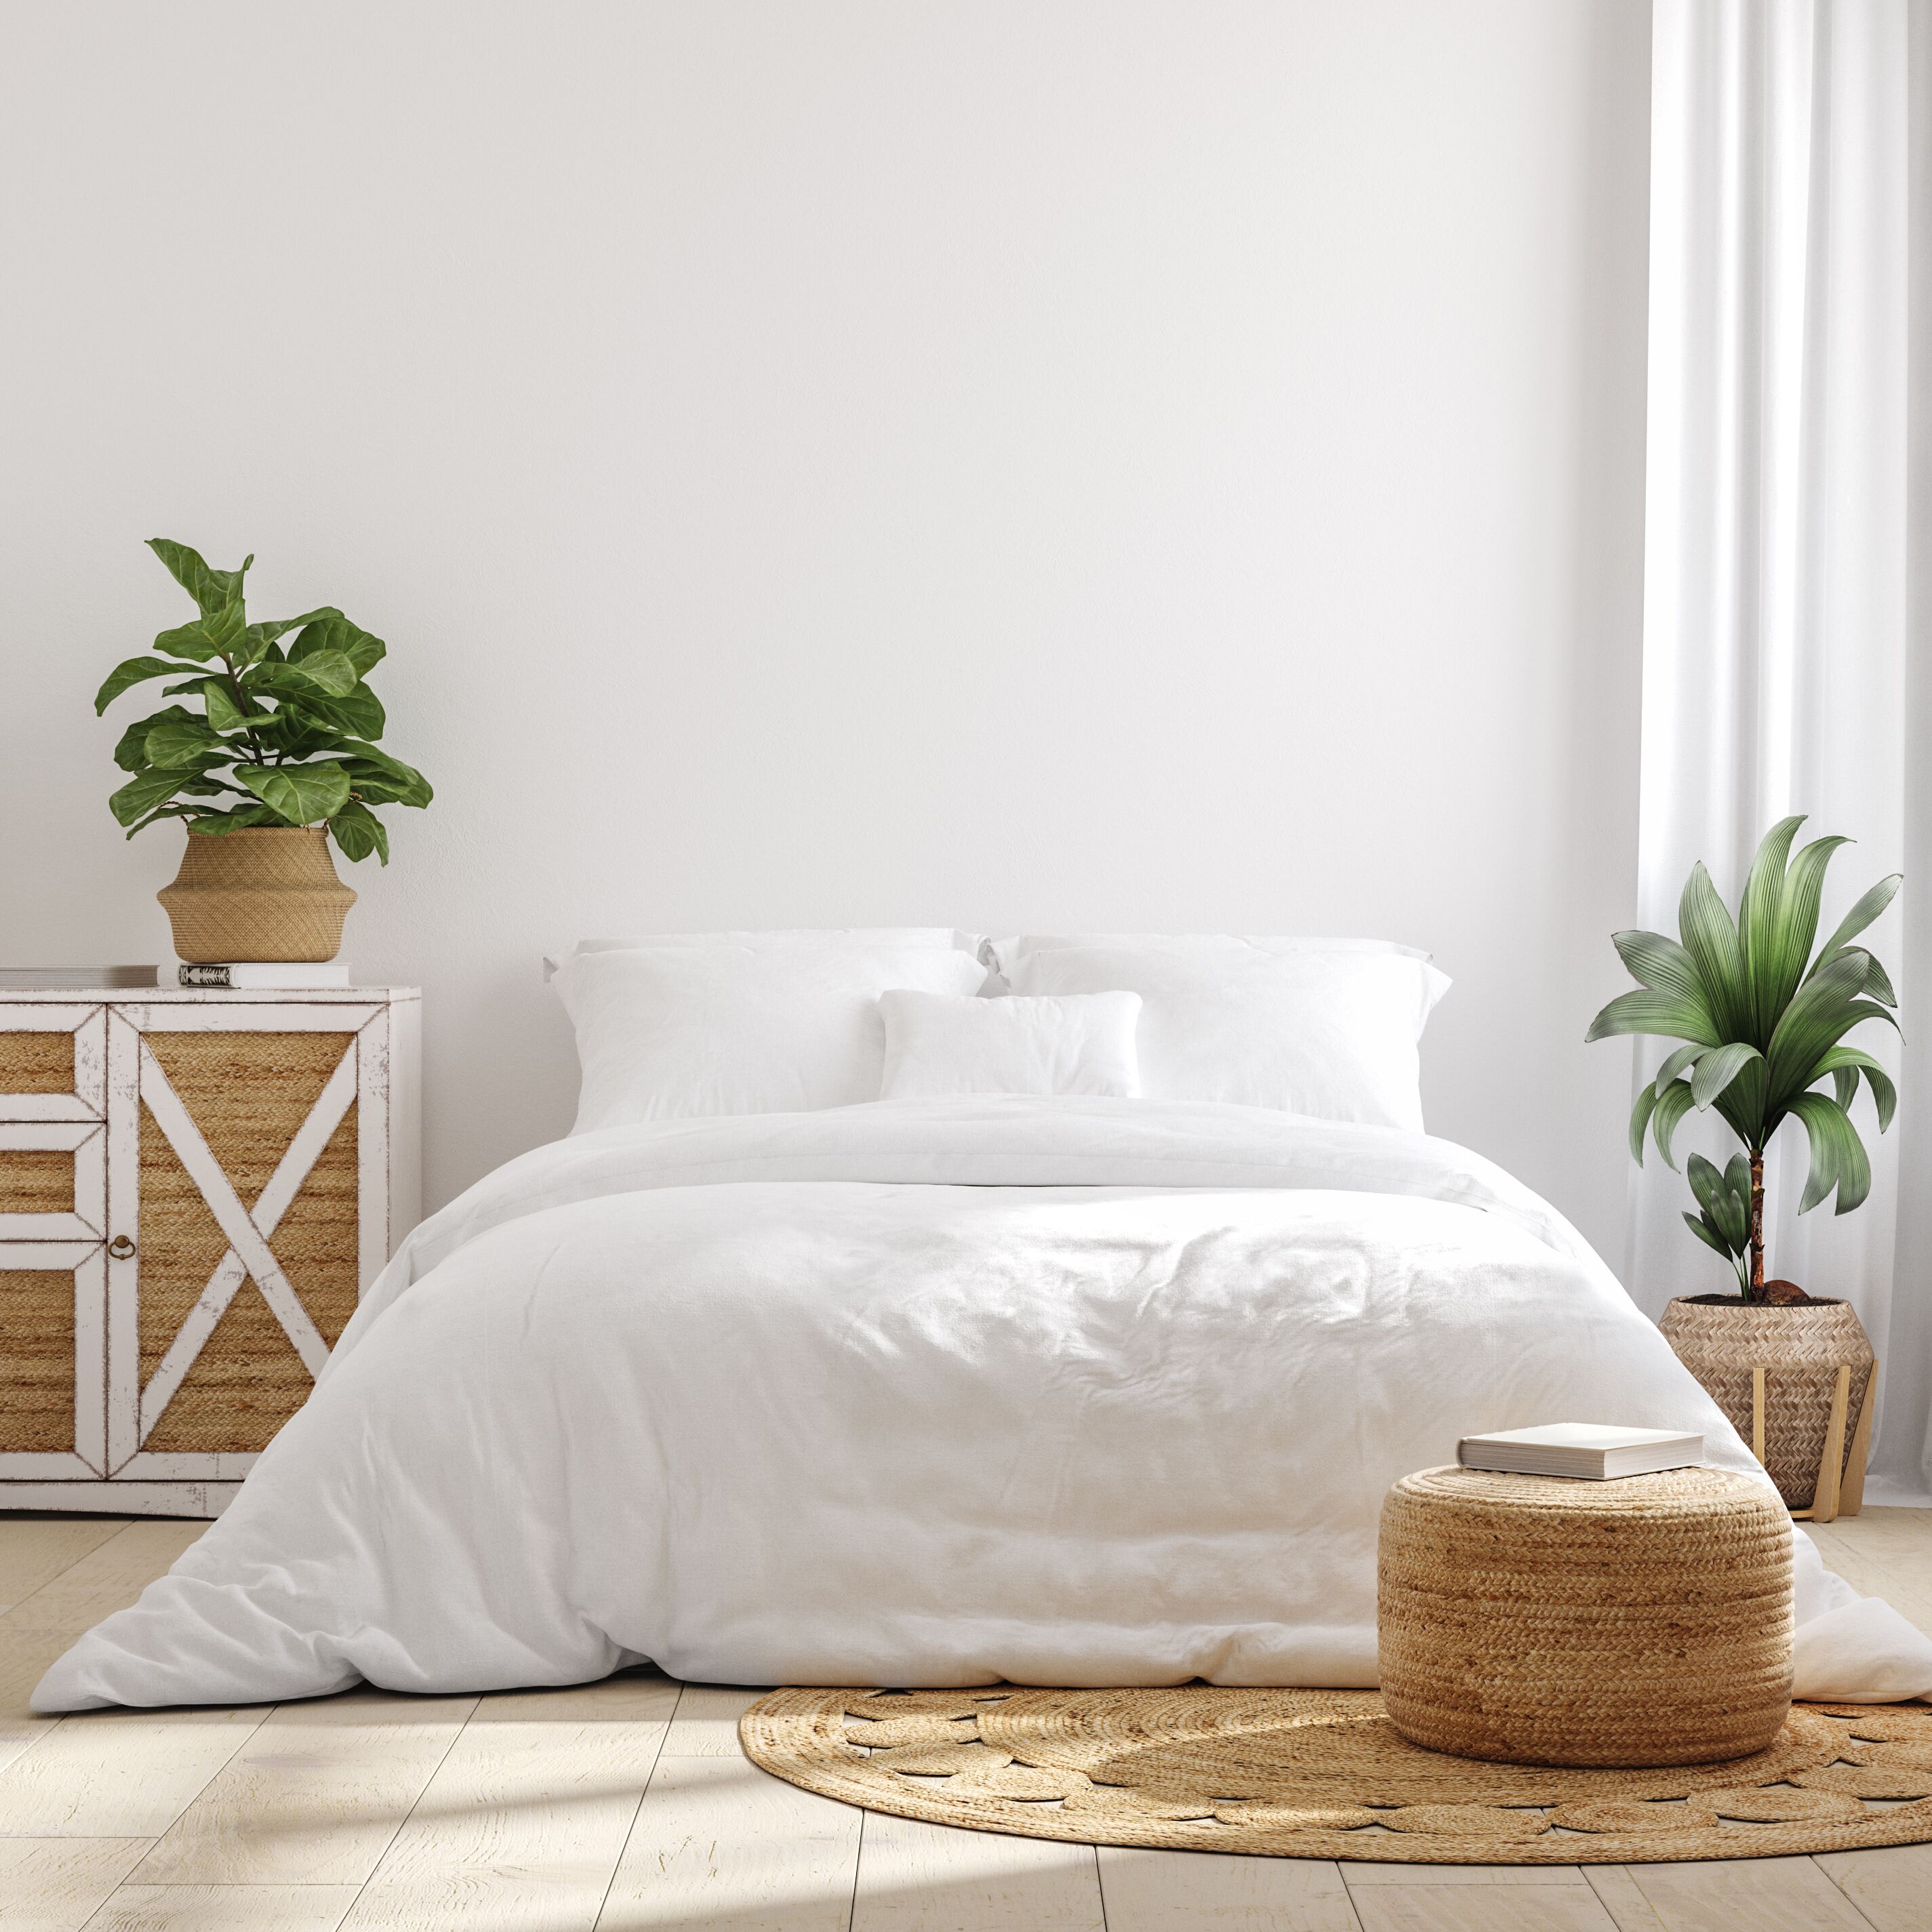 Comfortable white bedding on a bed surrounded by rattan furniture and plants